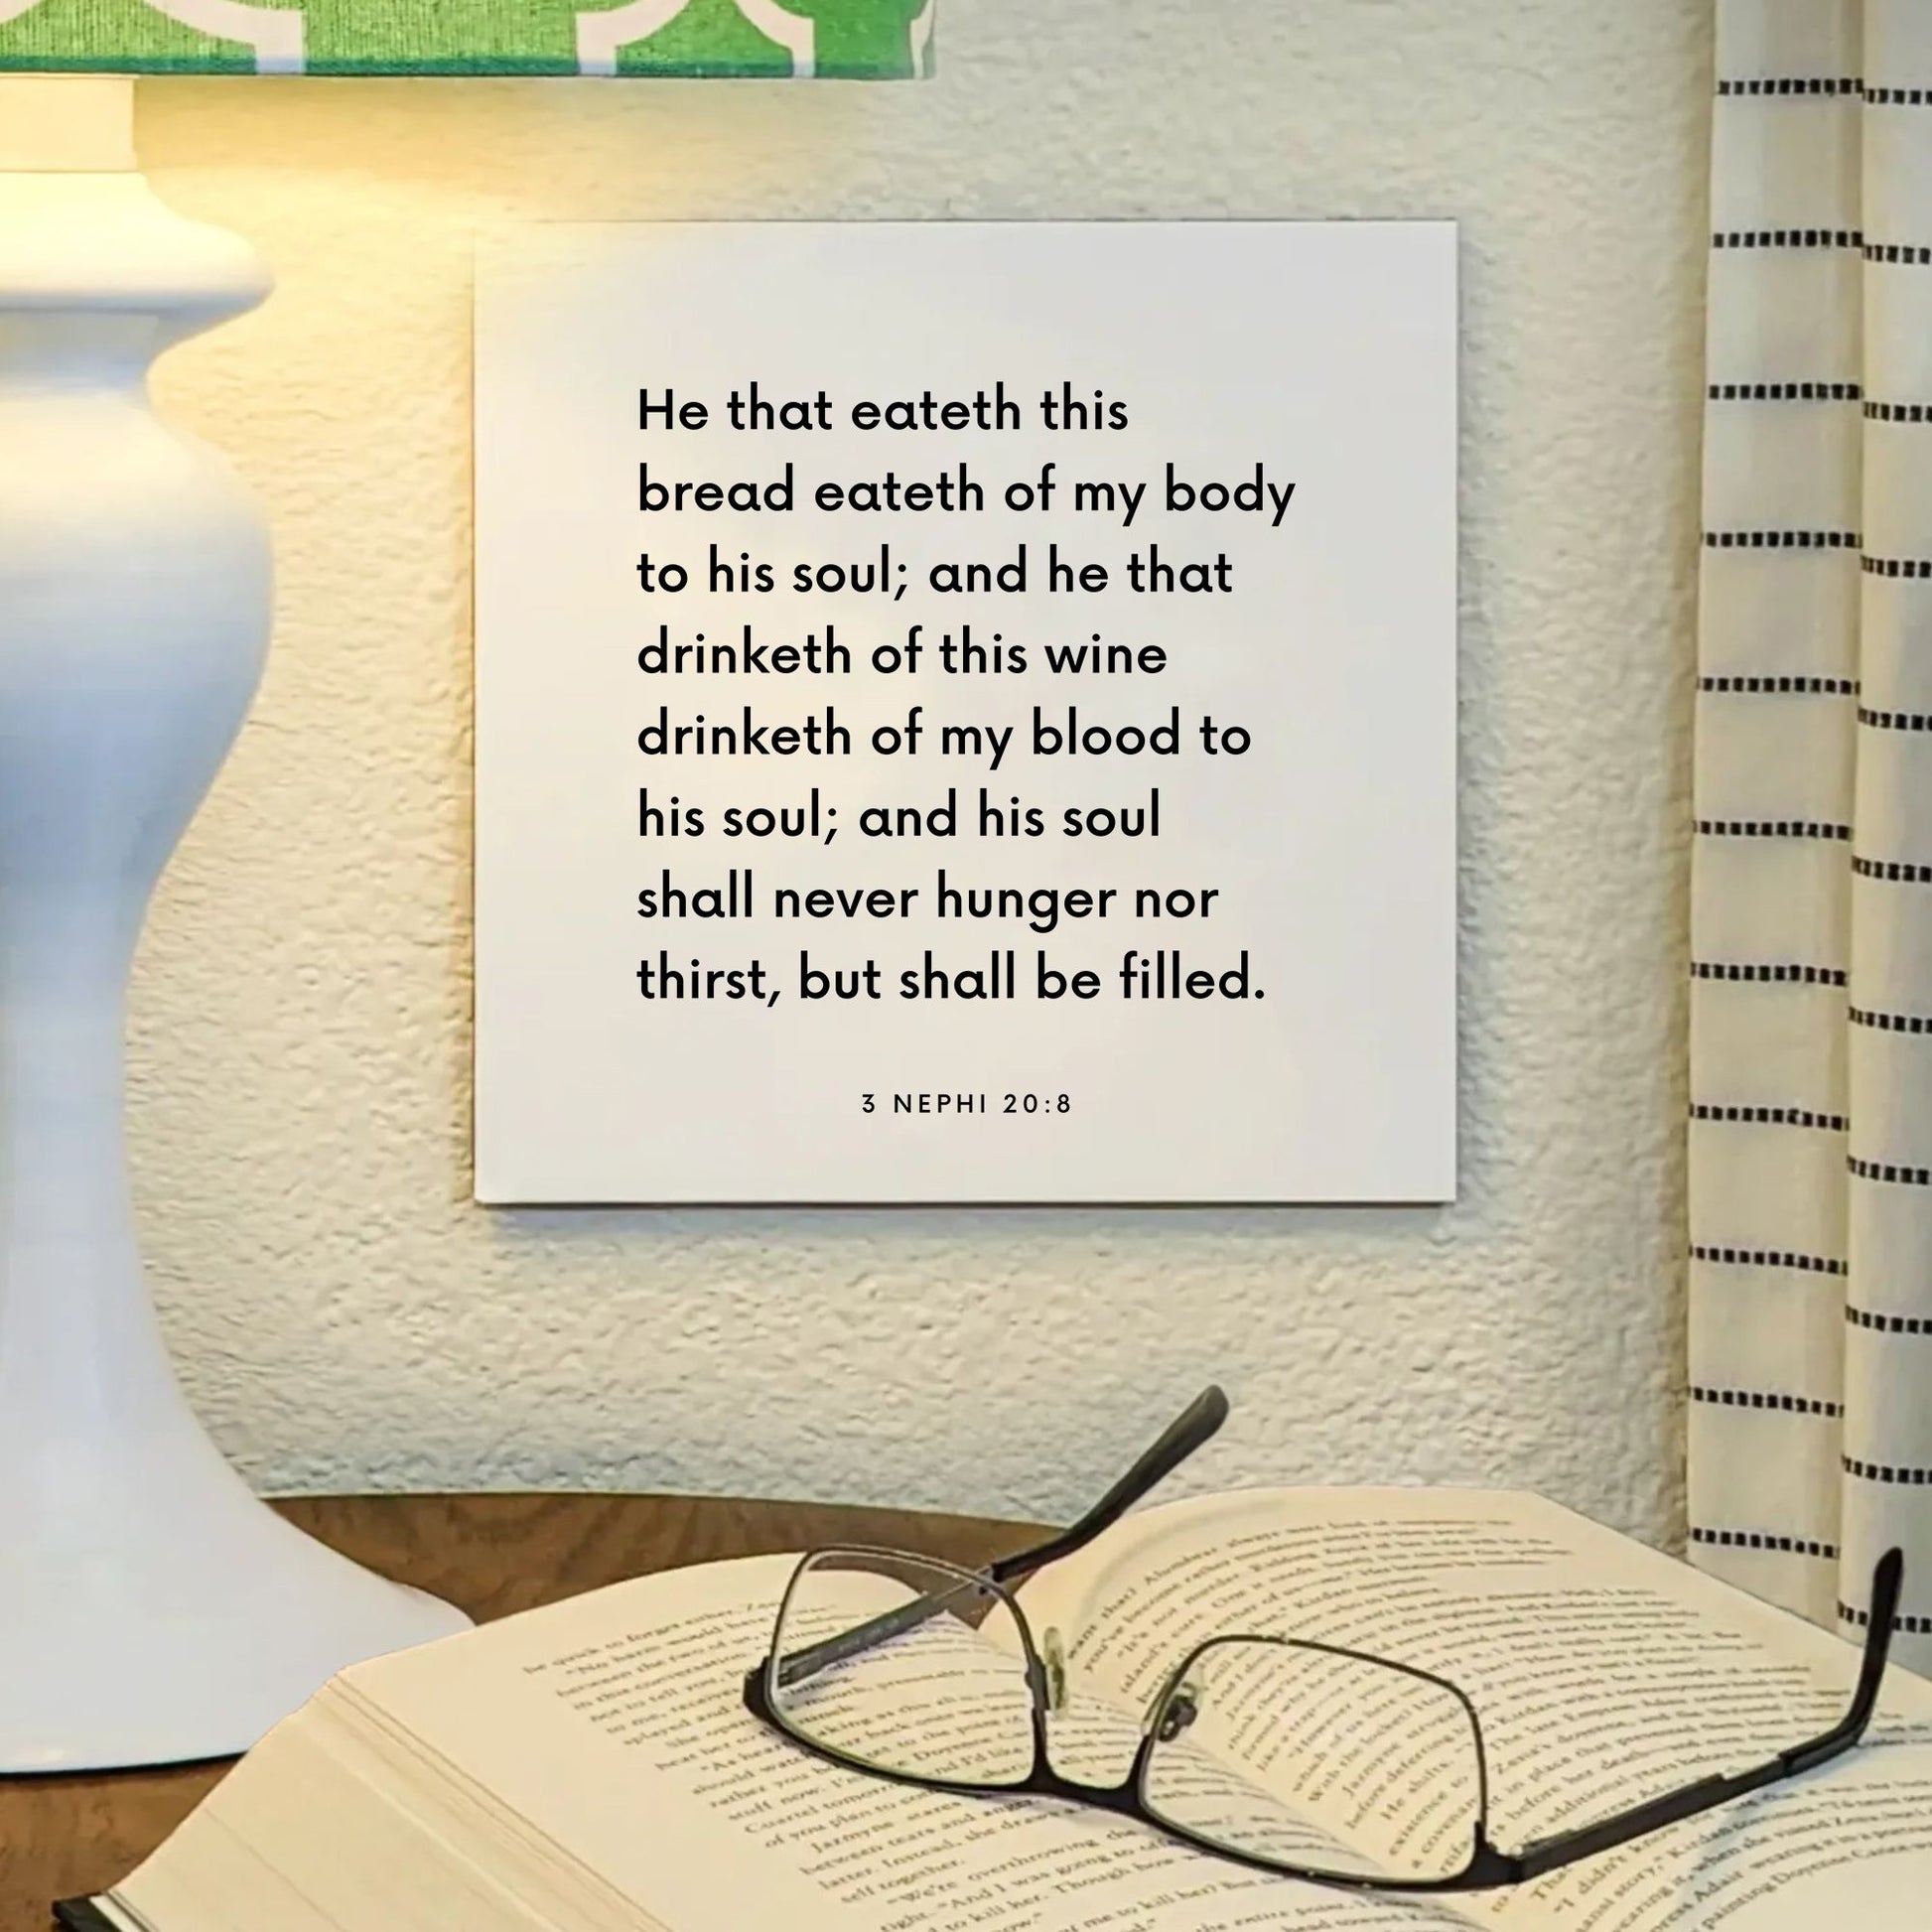 Lamp mouting of the scripture tile for 3 Nephi 20:8 - "He that eateth this bread eateth of my body to his soul"